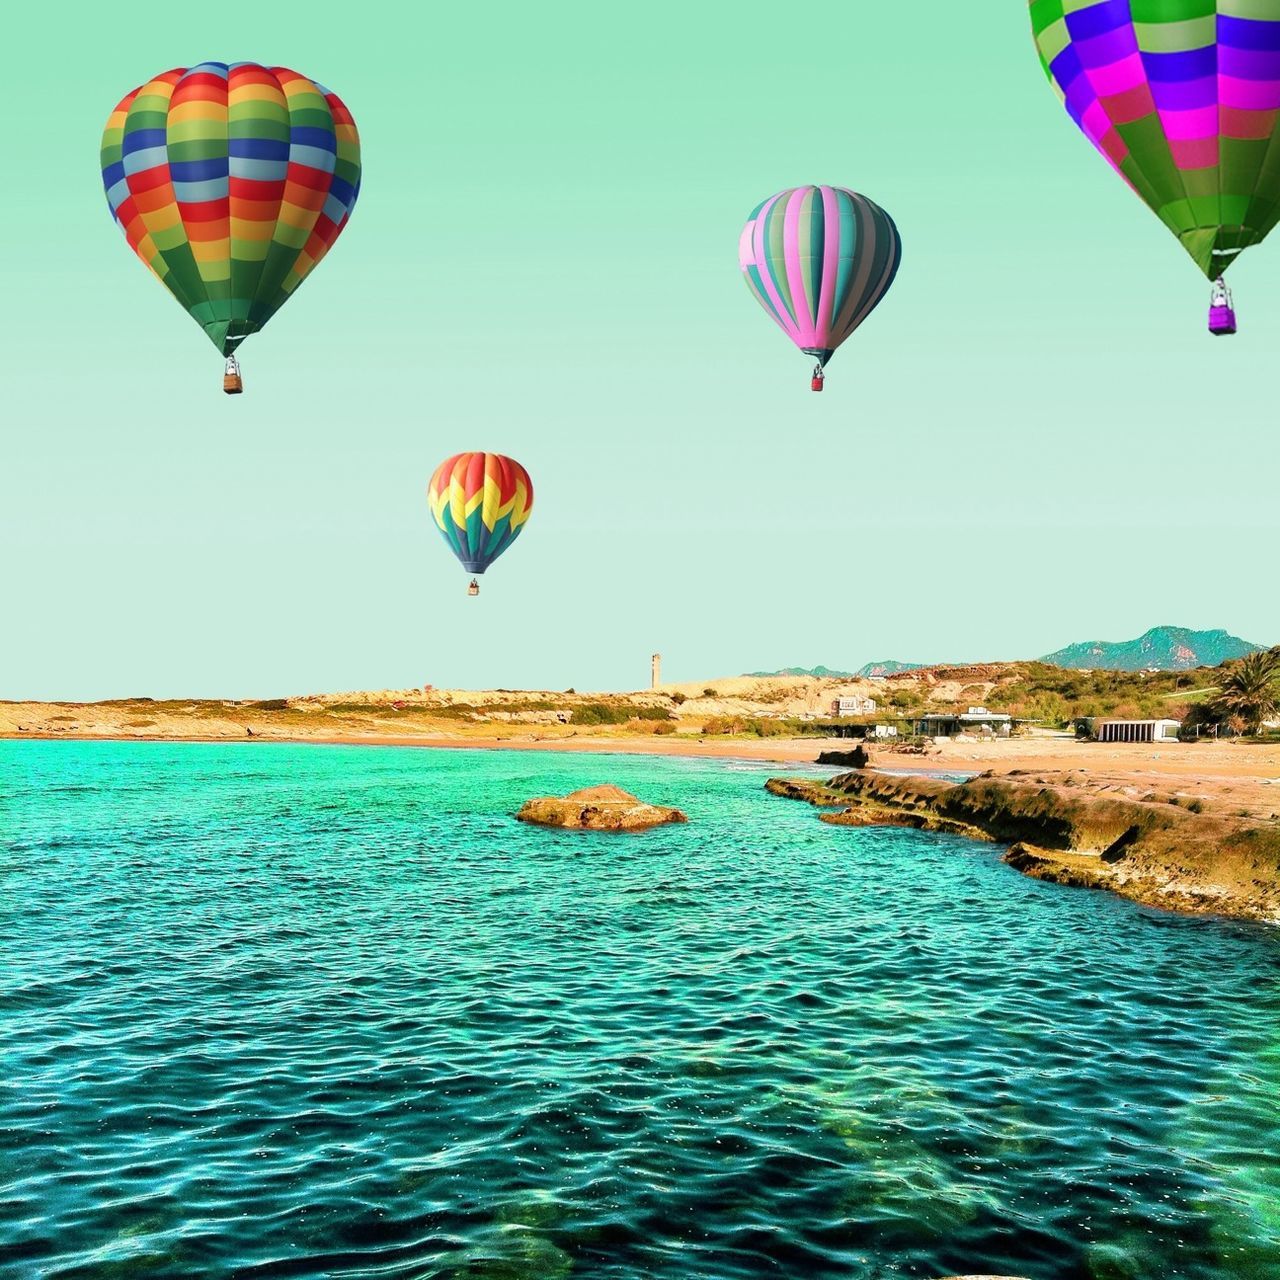 sea, water, parachute, flying, mid-air, multi colored, blue, clear sky, hot air balloon, paragliding, vacations, scenics, tranquility, leisure activity, adventure, tranquil scene, waterfront, beauty in nature, sky, fun